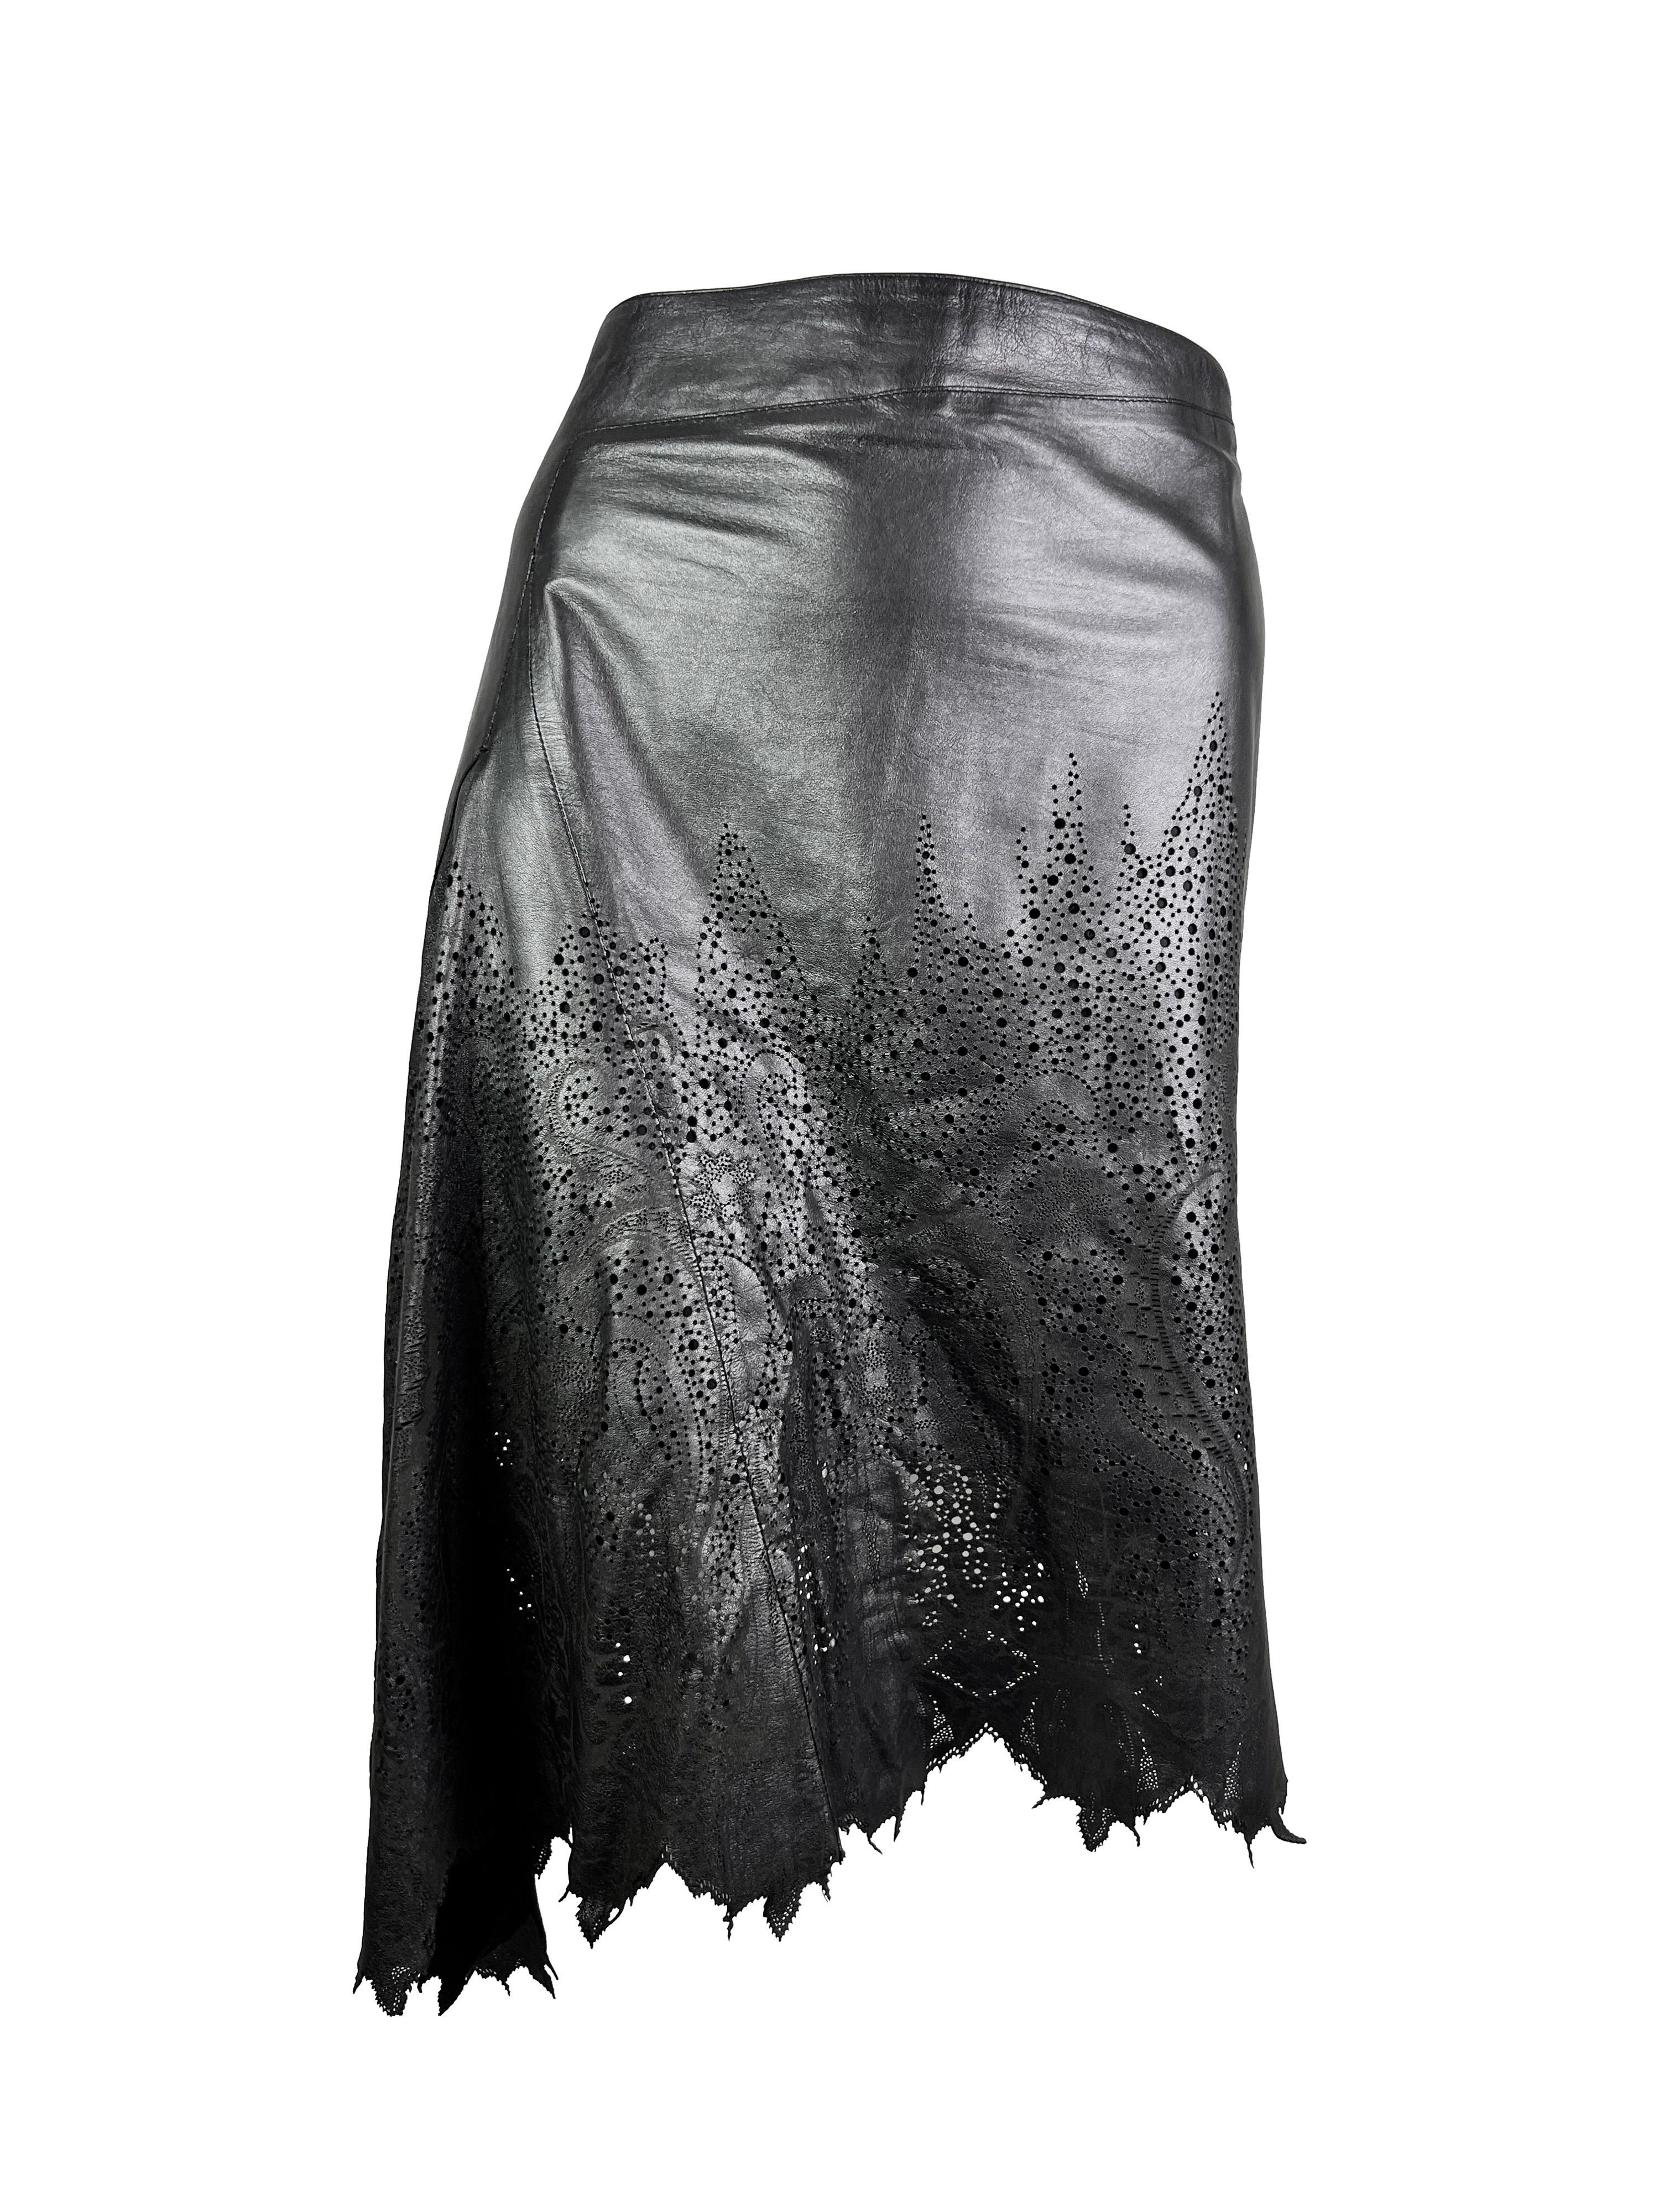 A beautiful asymmetrical skirt with laser cut-out details from the finest Italian leather. 

Size M, fits true to size.

Waist - 41 cm (16,5 in)

Hips - 55 cm (21,5 in)

Length (shortest) - 56 cm (22 in)

Excellent vintage condition. 